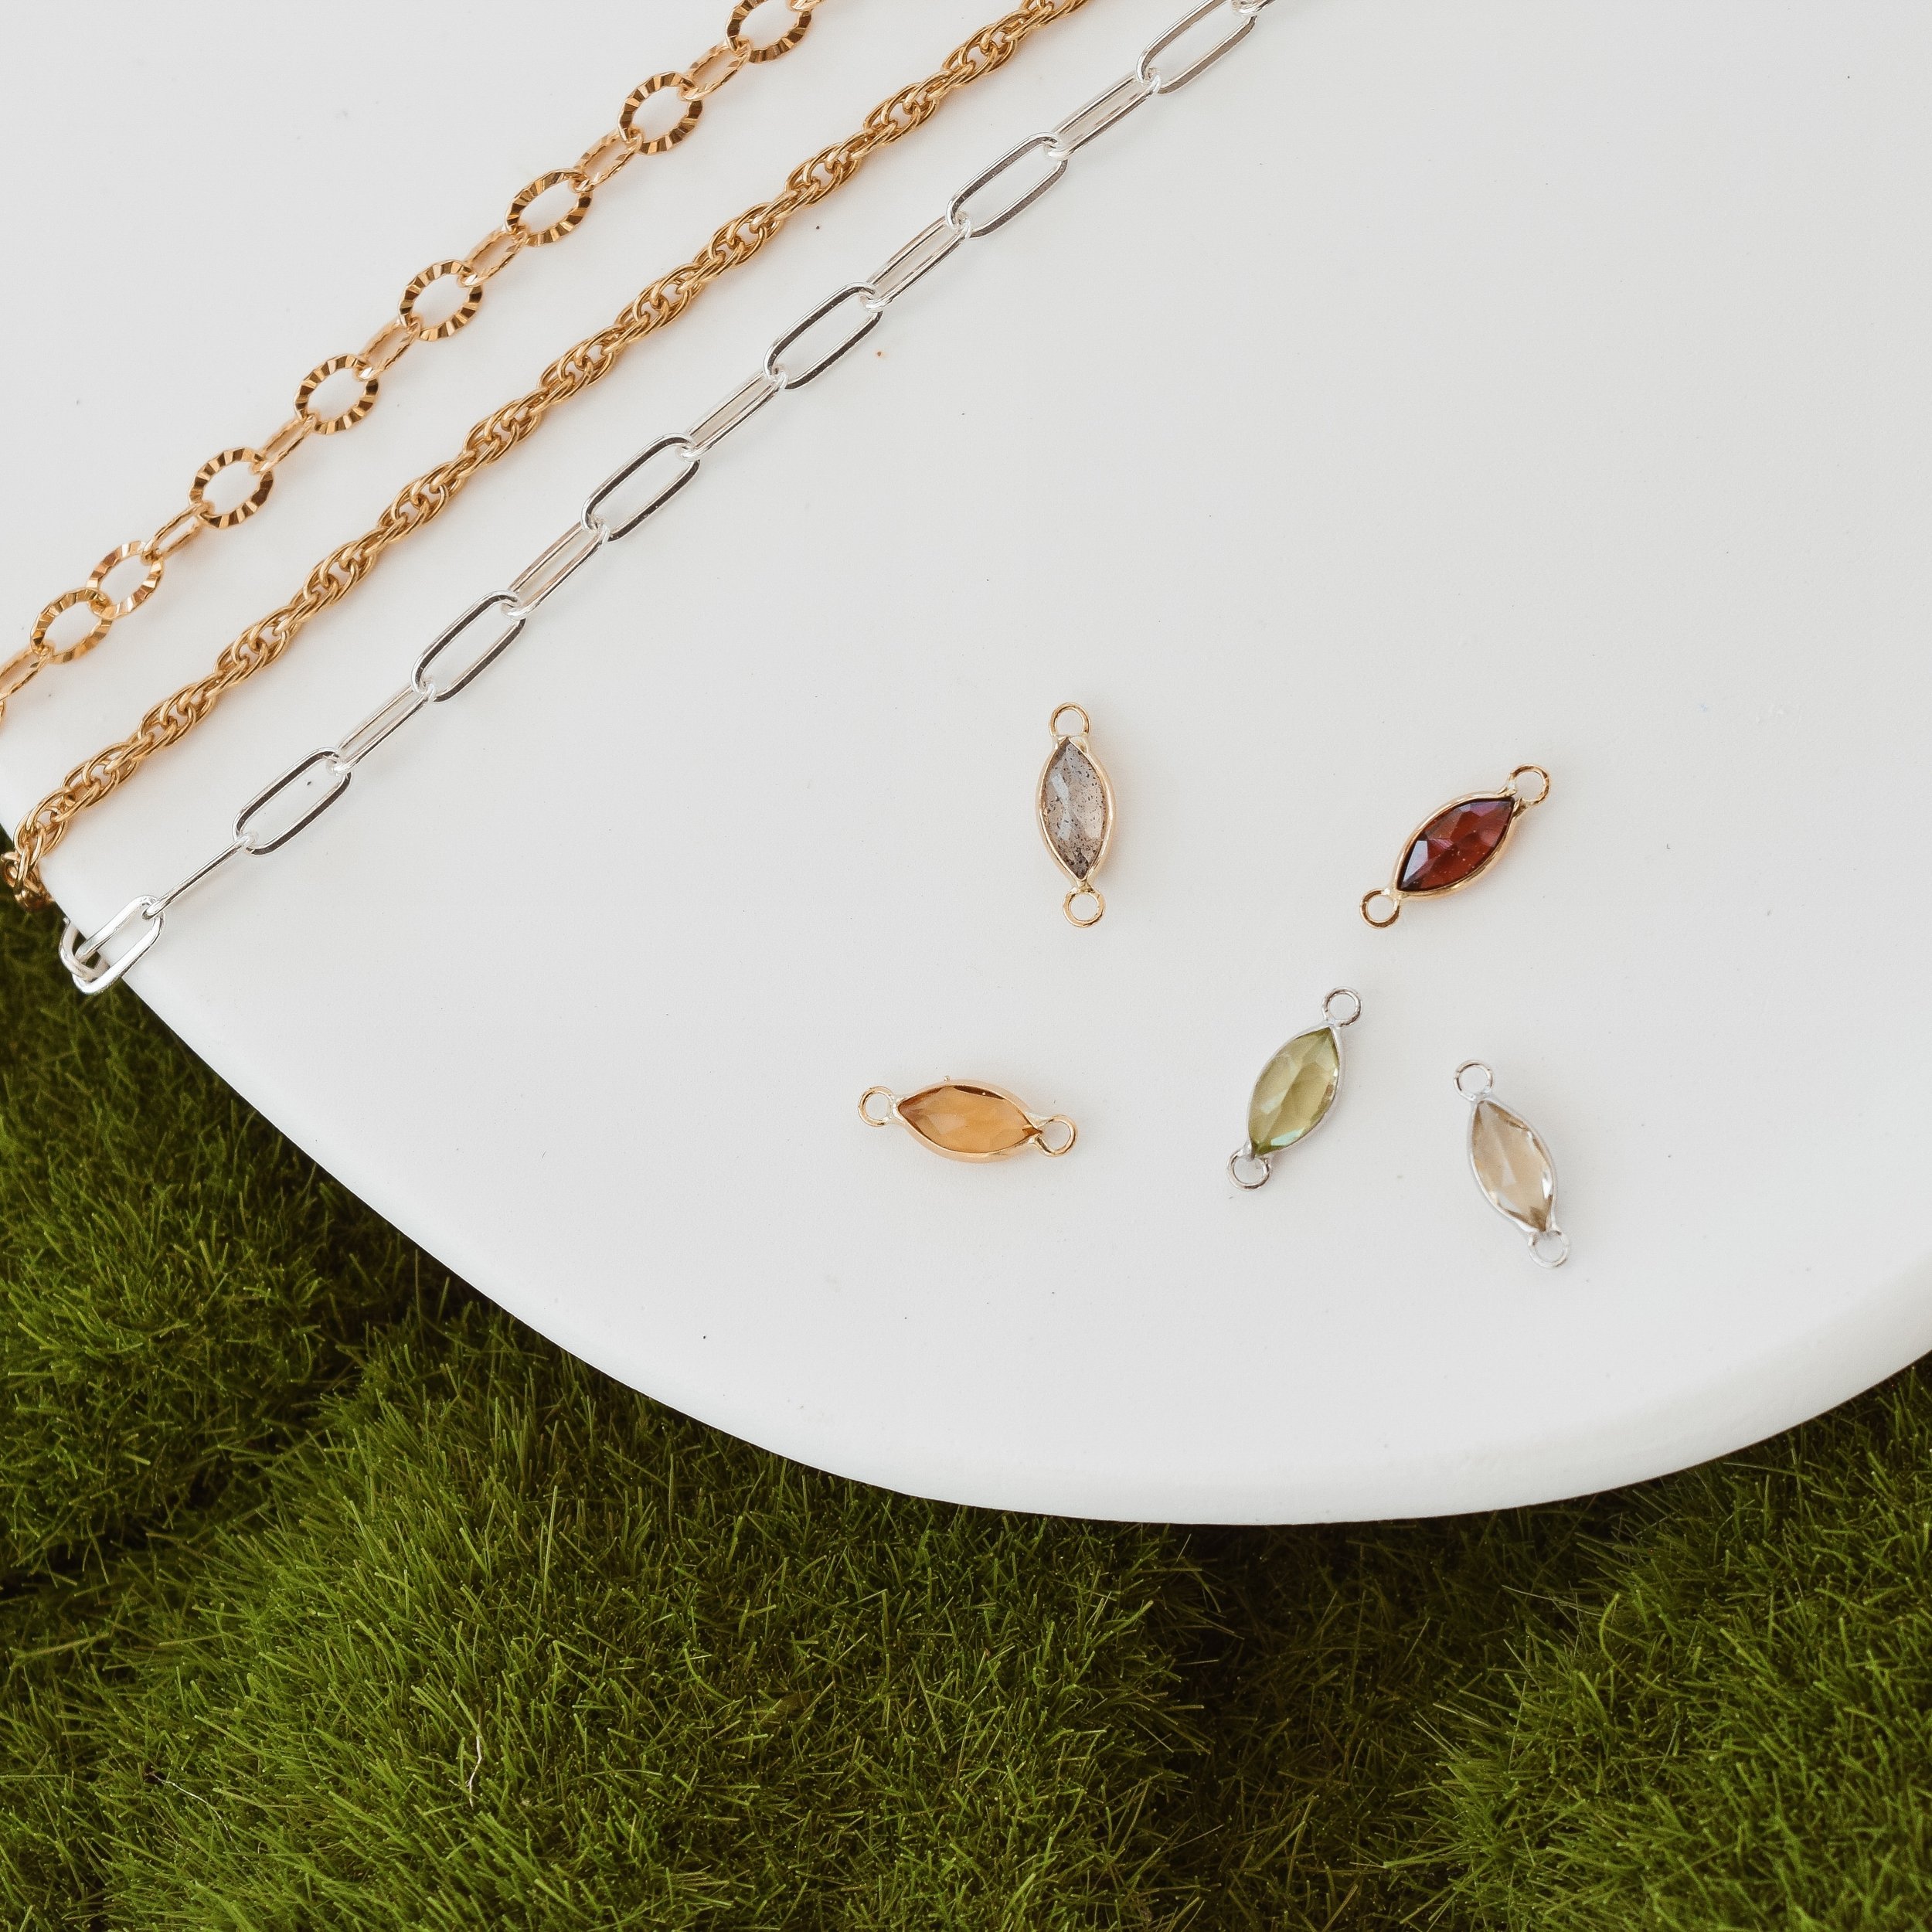 ✨🔗 Did you know&hellip;.

Each piece of jewelry is tailored to you? 🔗✨

When choosing ForeverLinked, you will get to completely customize your own piece of jewelry! You will choose a chain, from our wide selection of 14k white and yellow gold, gold